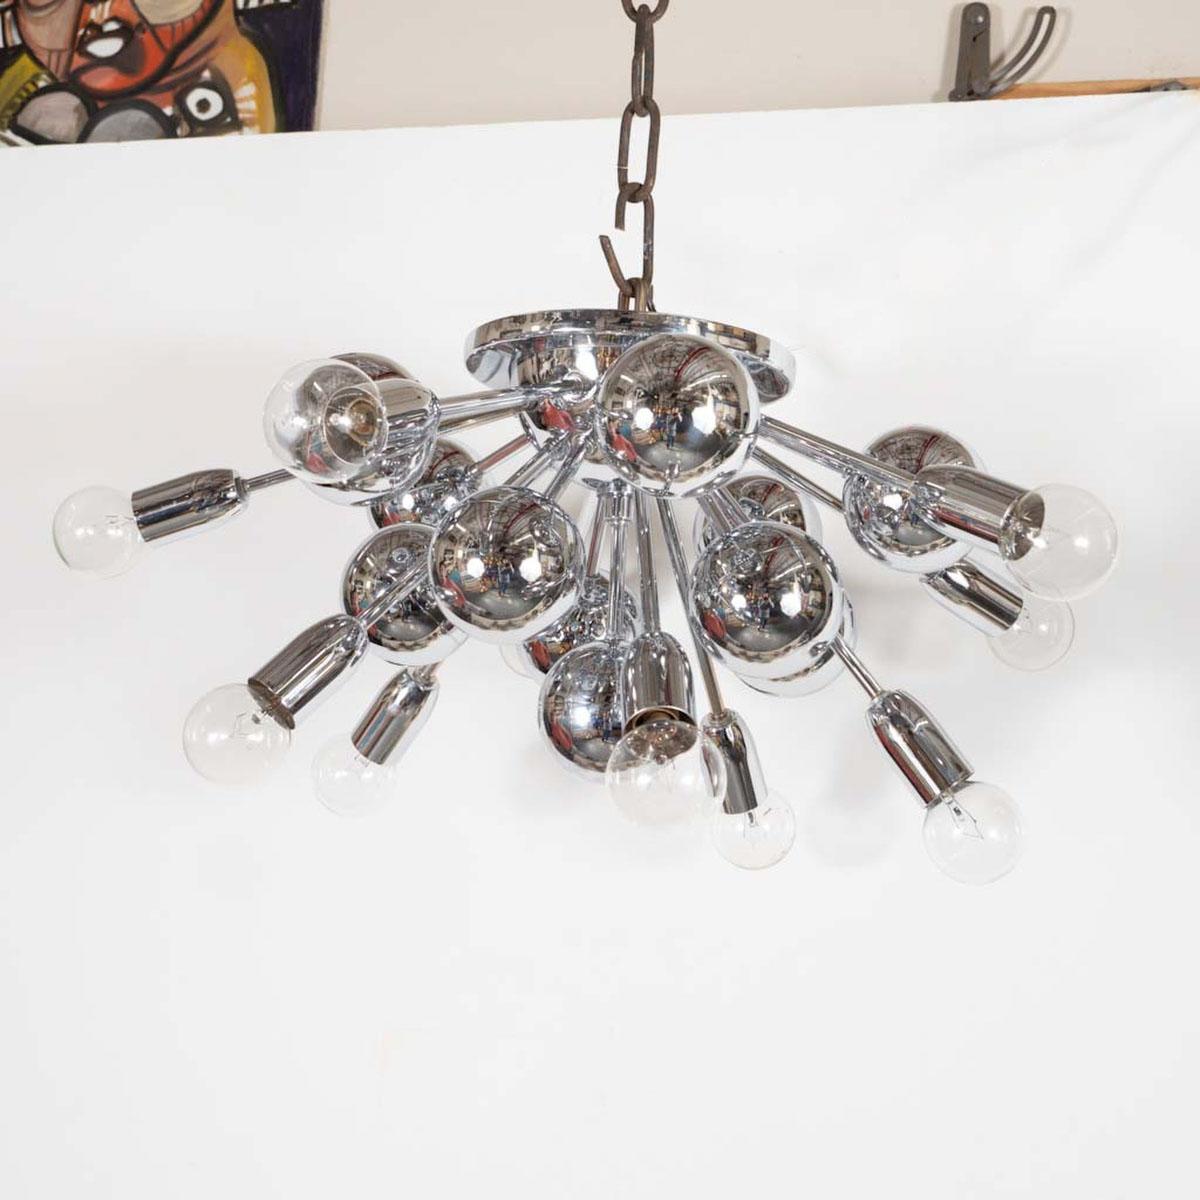 Chrome sputnik style flush mount fixture with rays terminating in spheres. Light bulbs are not included.